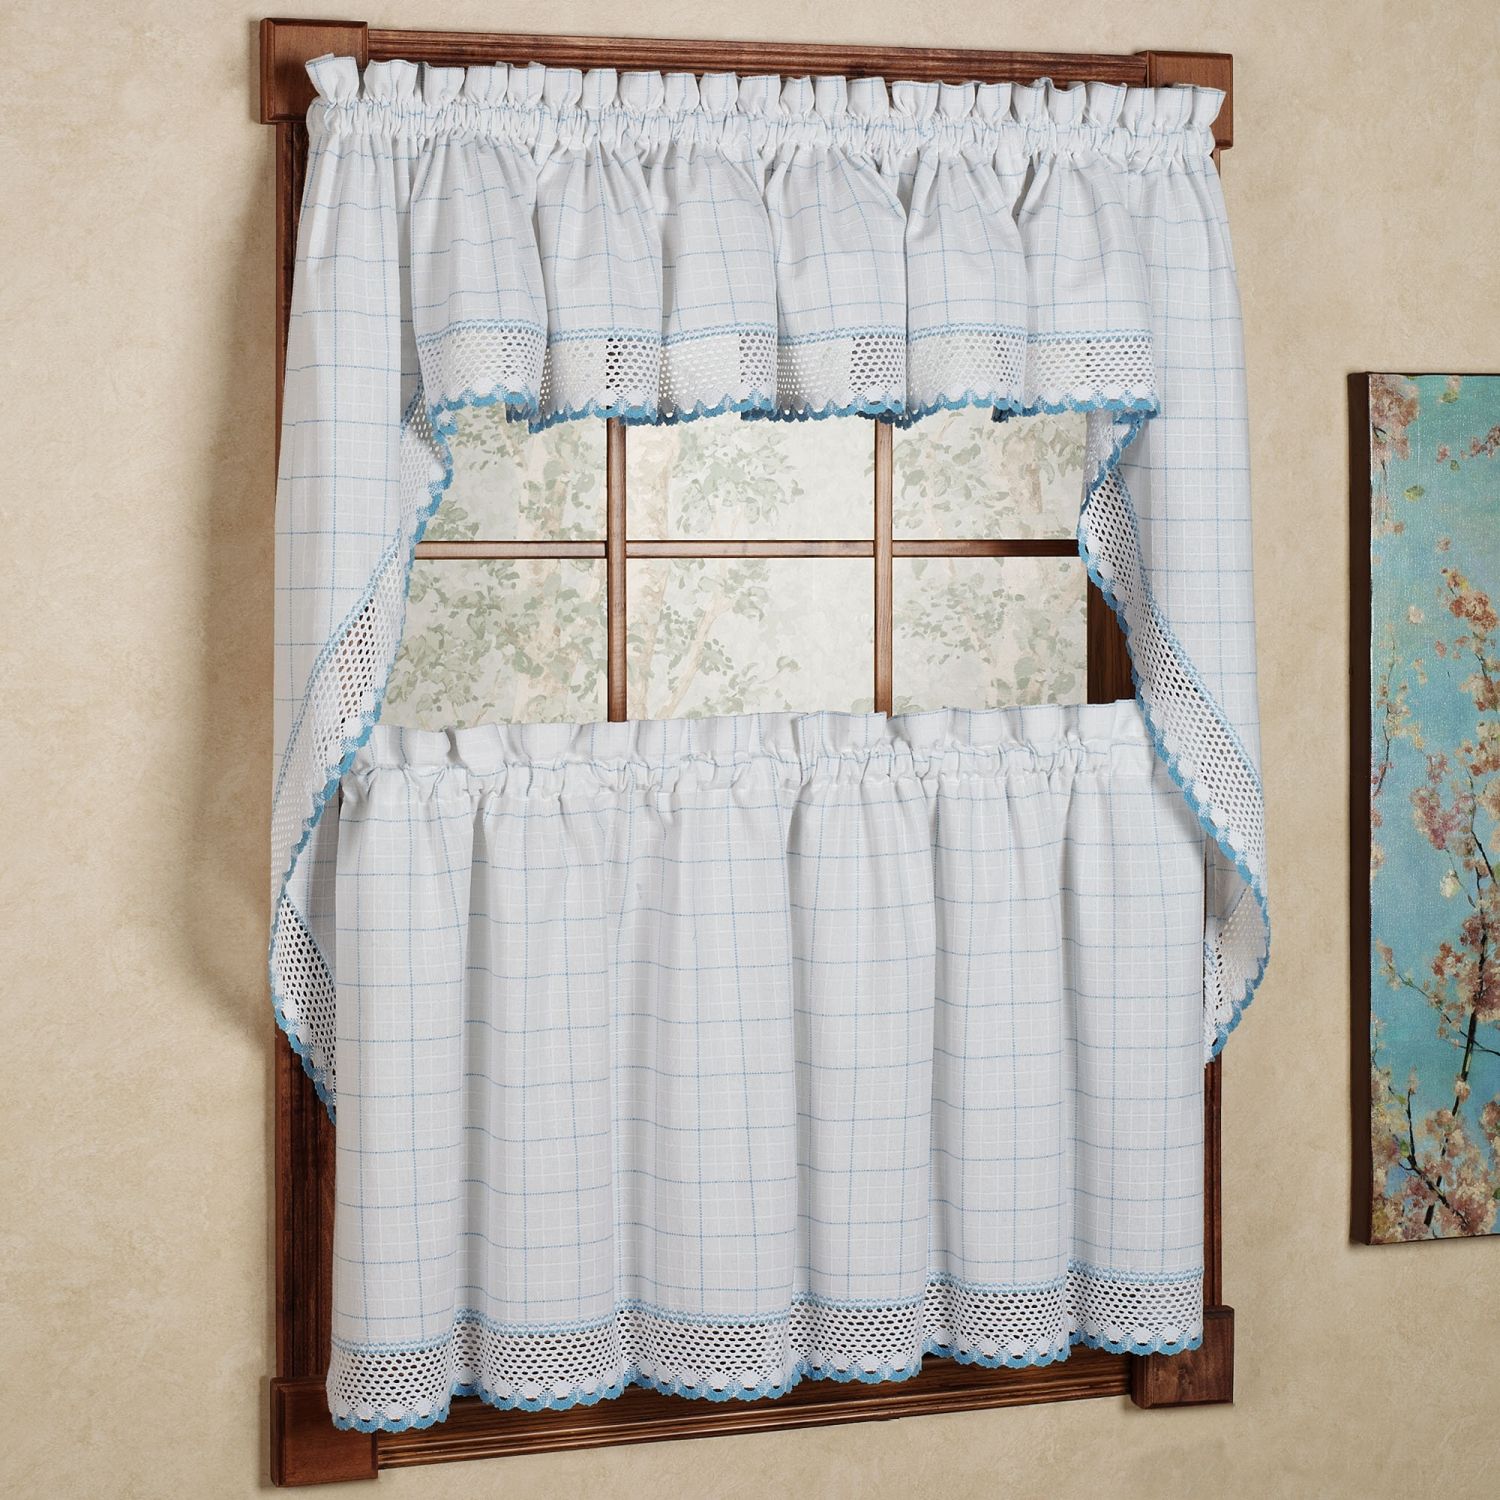 Details About Adirondack Cotton Kitchen Window Curtains – White/blue –  Tiers, Valance Or Swag With White Knit Lace Bird Motif Window Curtain Tiers (View 12 of 20)